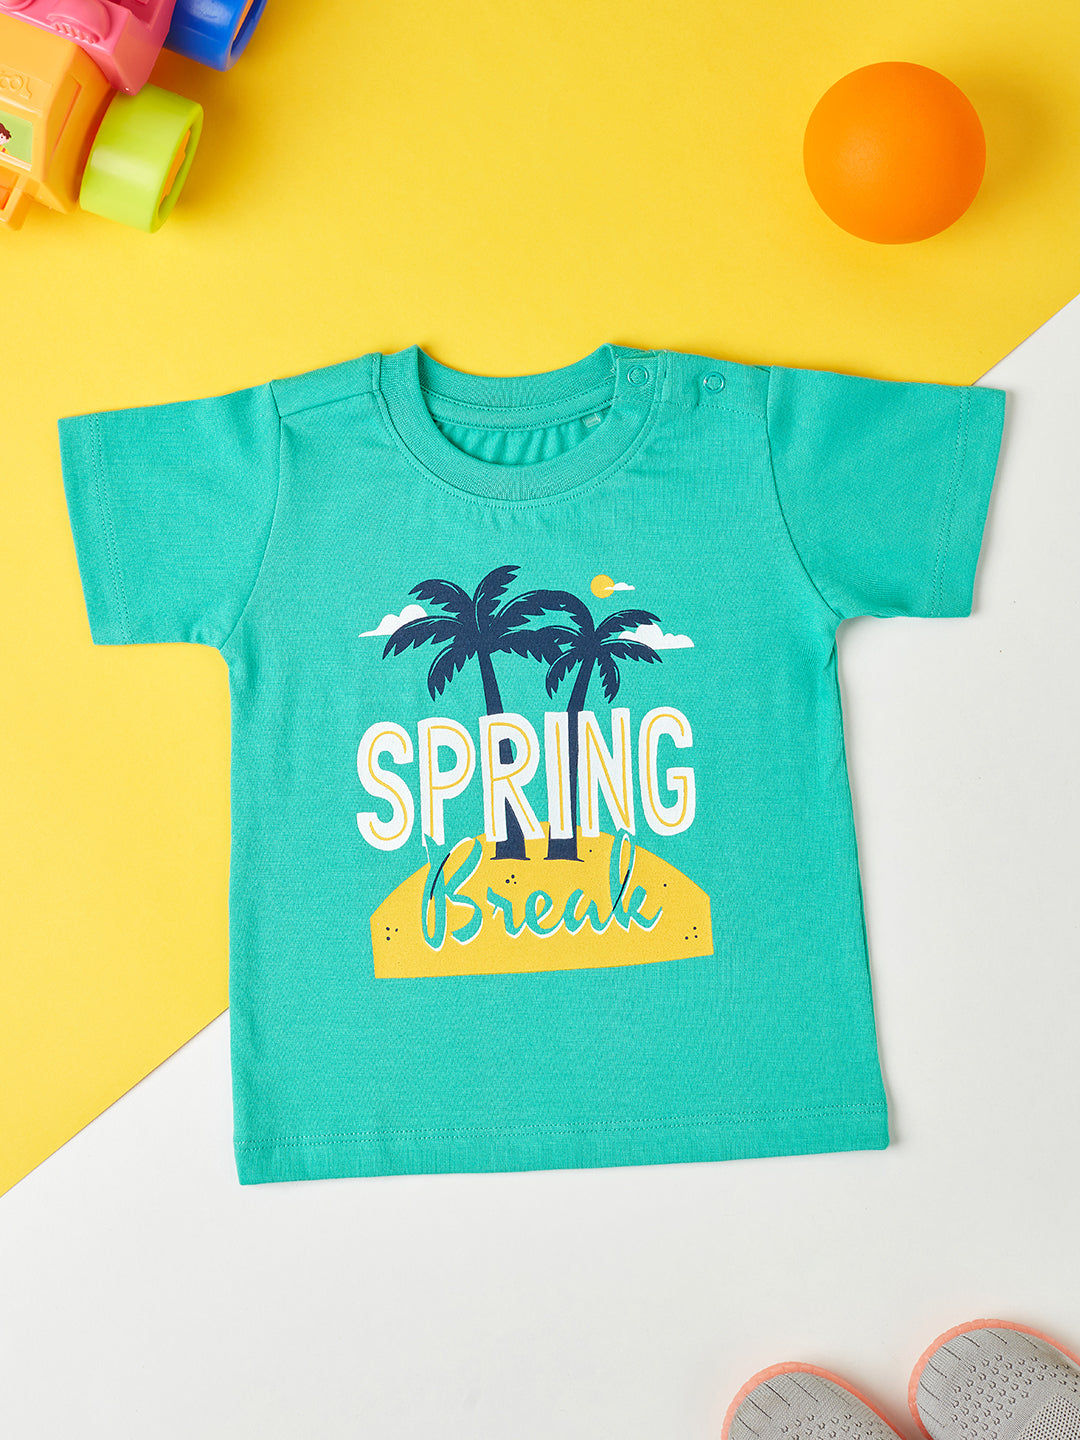 Boys Round Neck T-Shirts Half Sleeve - Mint Green with Colorful Print